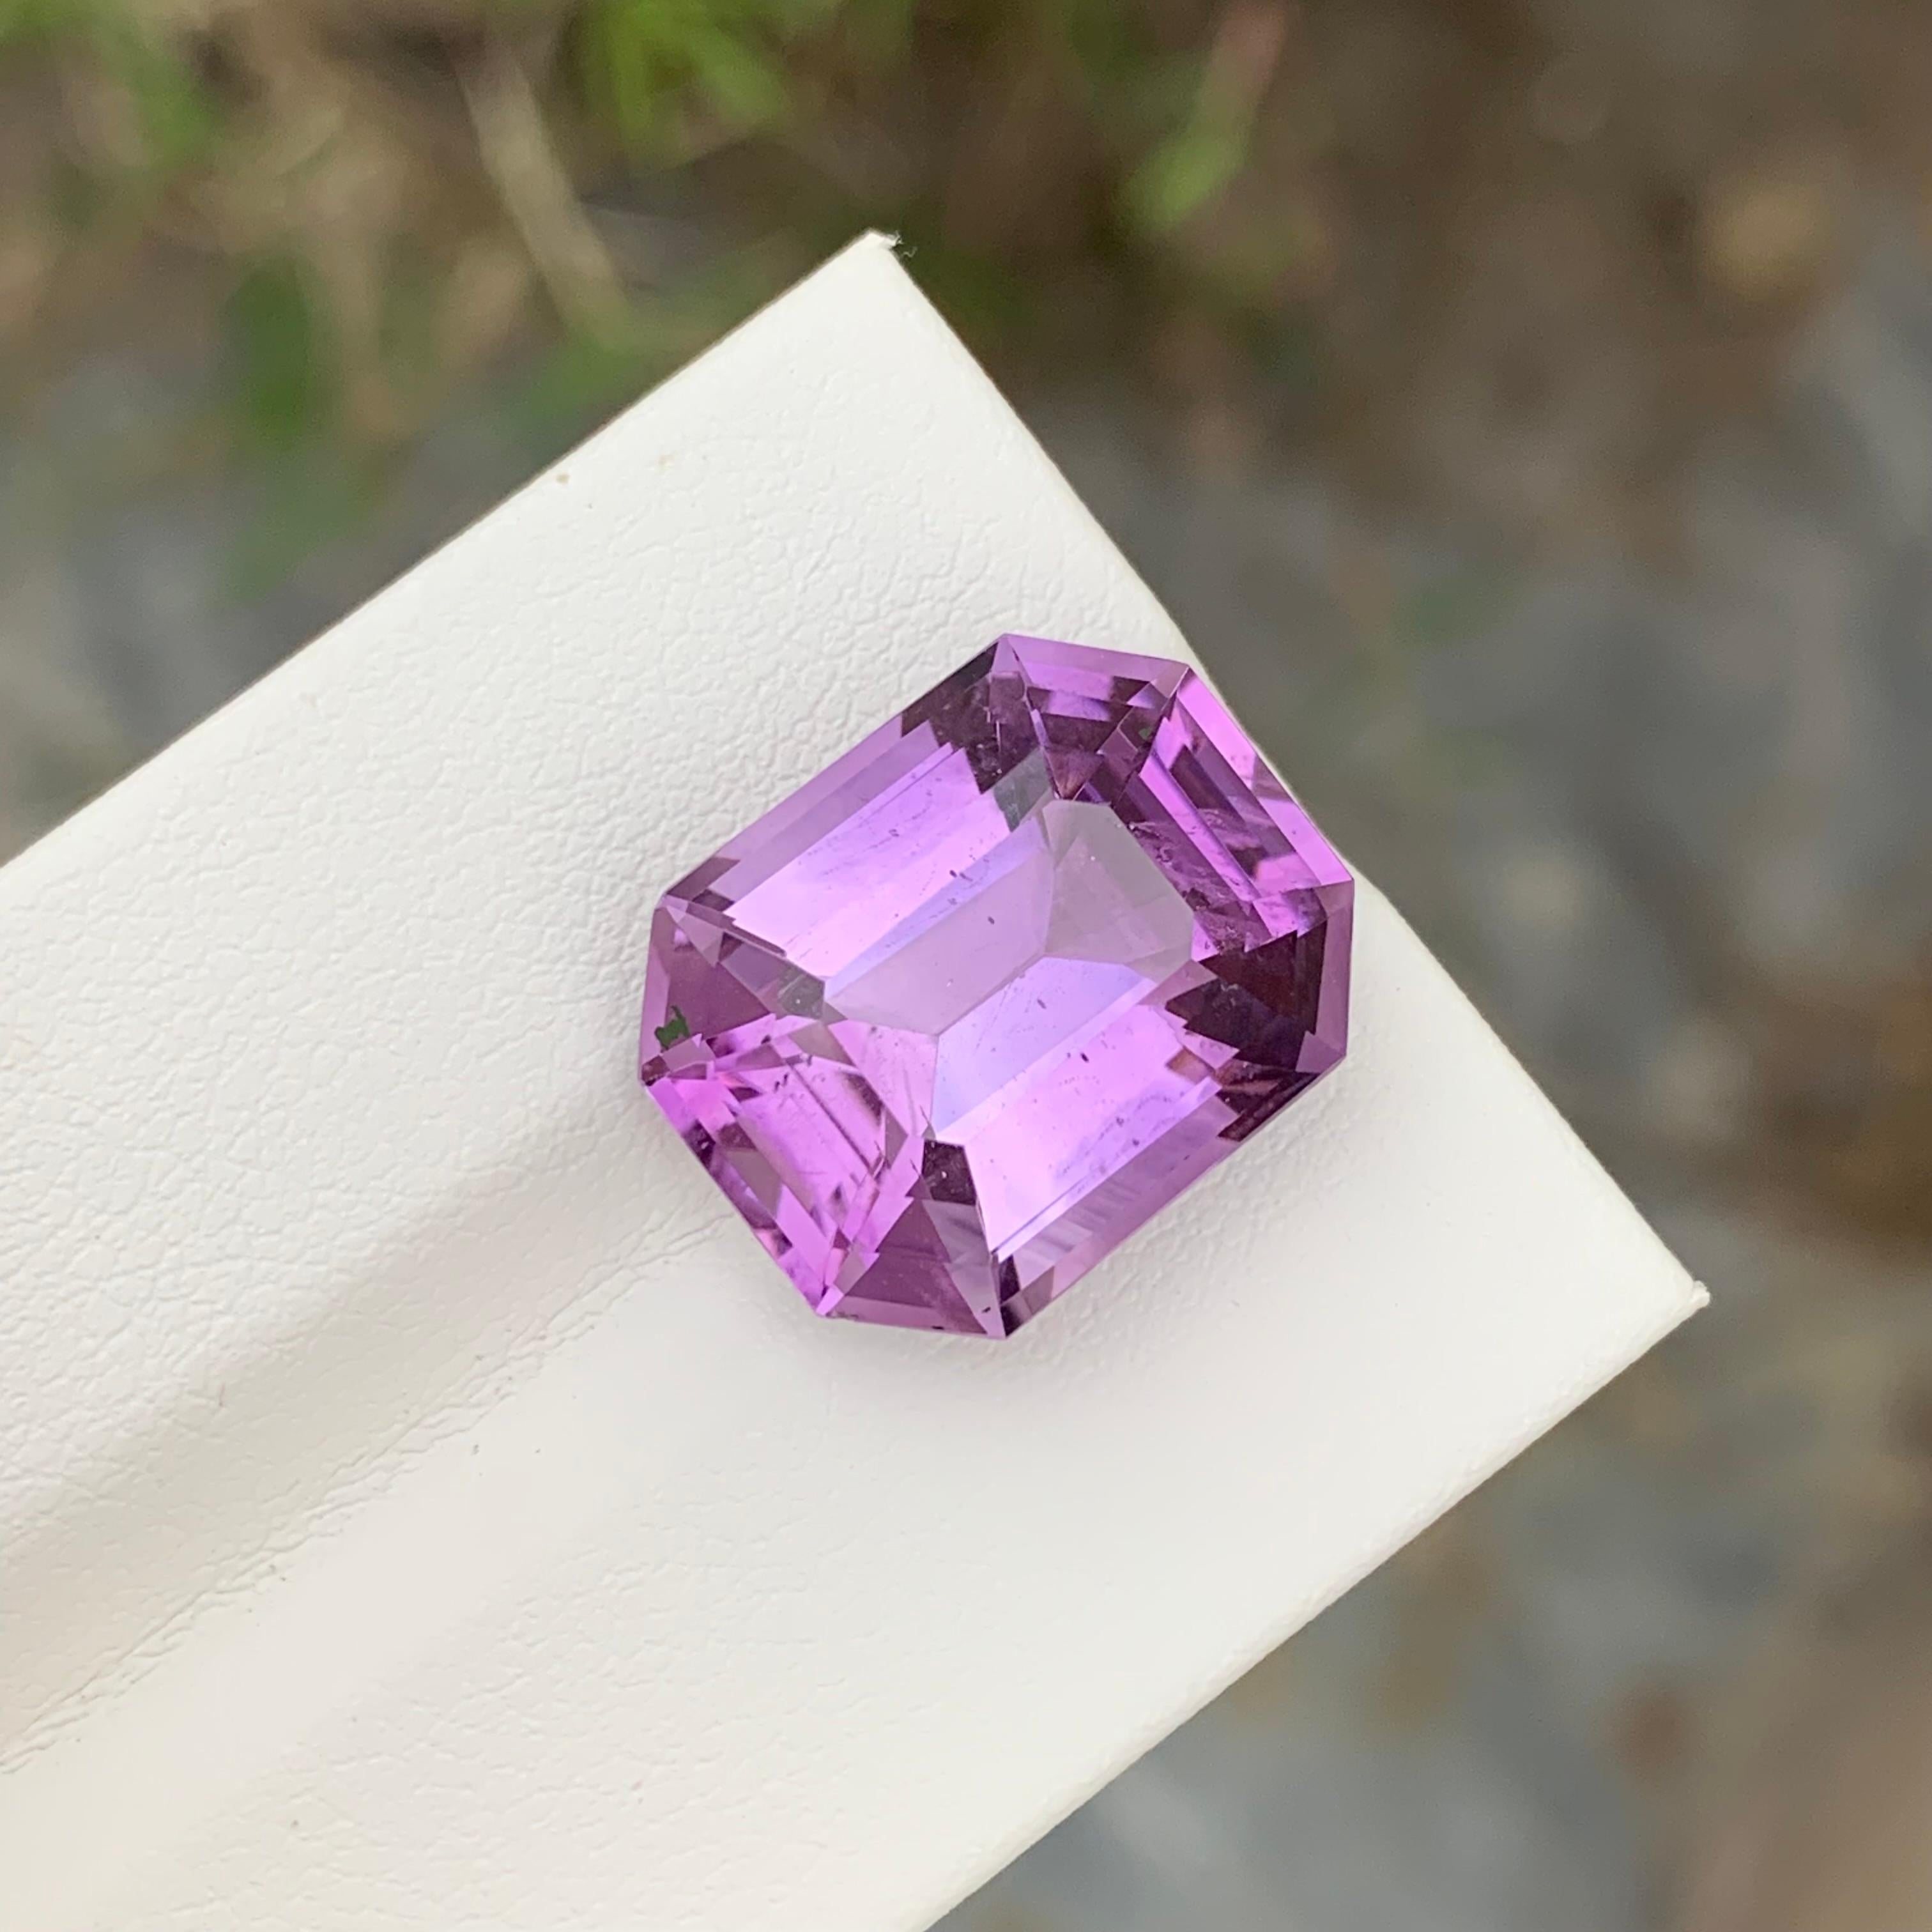 Loose Amethyst
Weight: 13.20 Carats
Dimension: 16.6 x 13.4 x 9.8 Mm
Colour: Purple
Origin: Brazil
Treatment: Non
Certificate: On Demand
Shape: Octagon 

Amethyst, a stunning variety of quartz known for its mesmerizing purple hue, has captivated